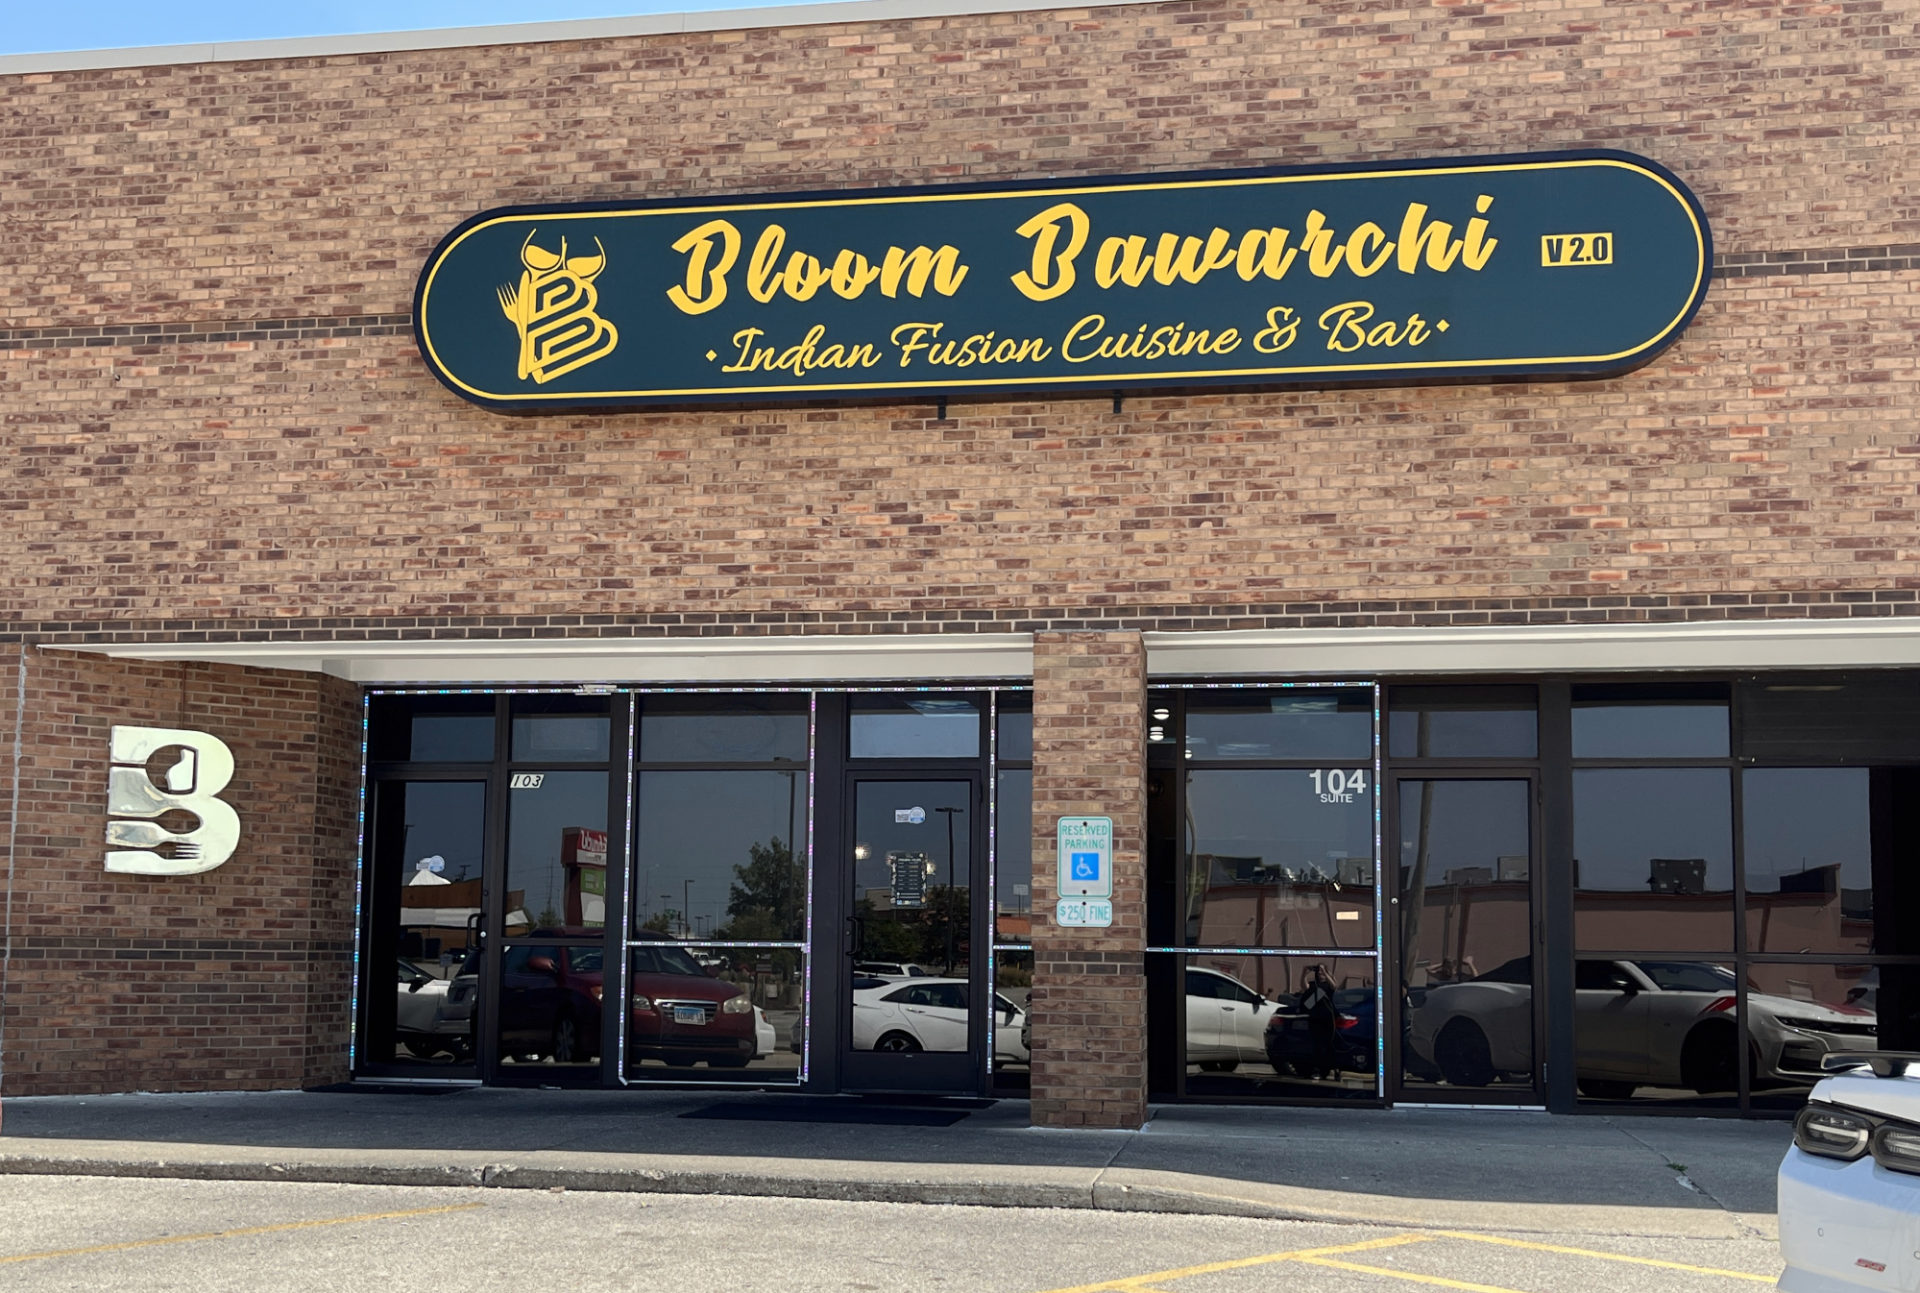 Exterior of Bloom Bawarchi Indian restaurant. A flat, light brown brick facade with a black sign with yellow lettering that reads "bloom bawarchi indian fusion cuisine & bar." Below are eight glass panels, including the entry door.